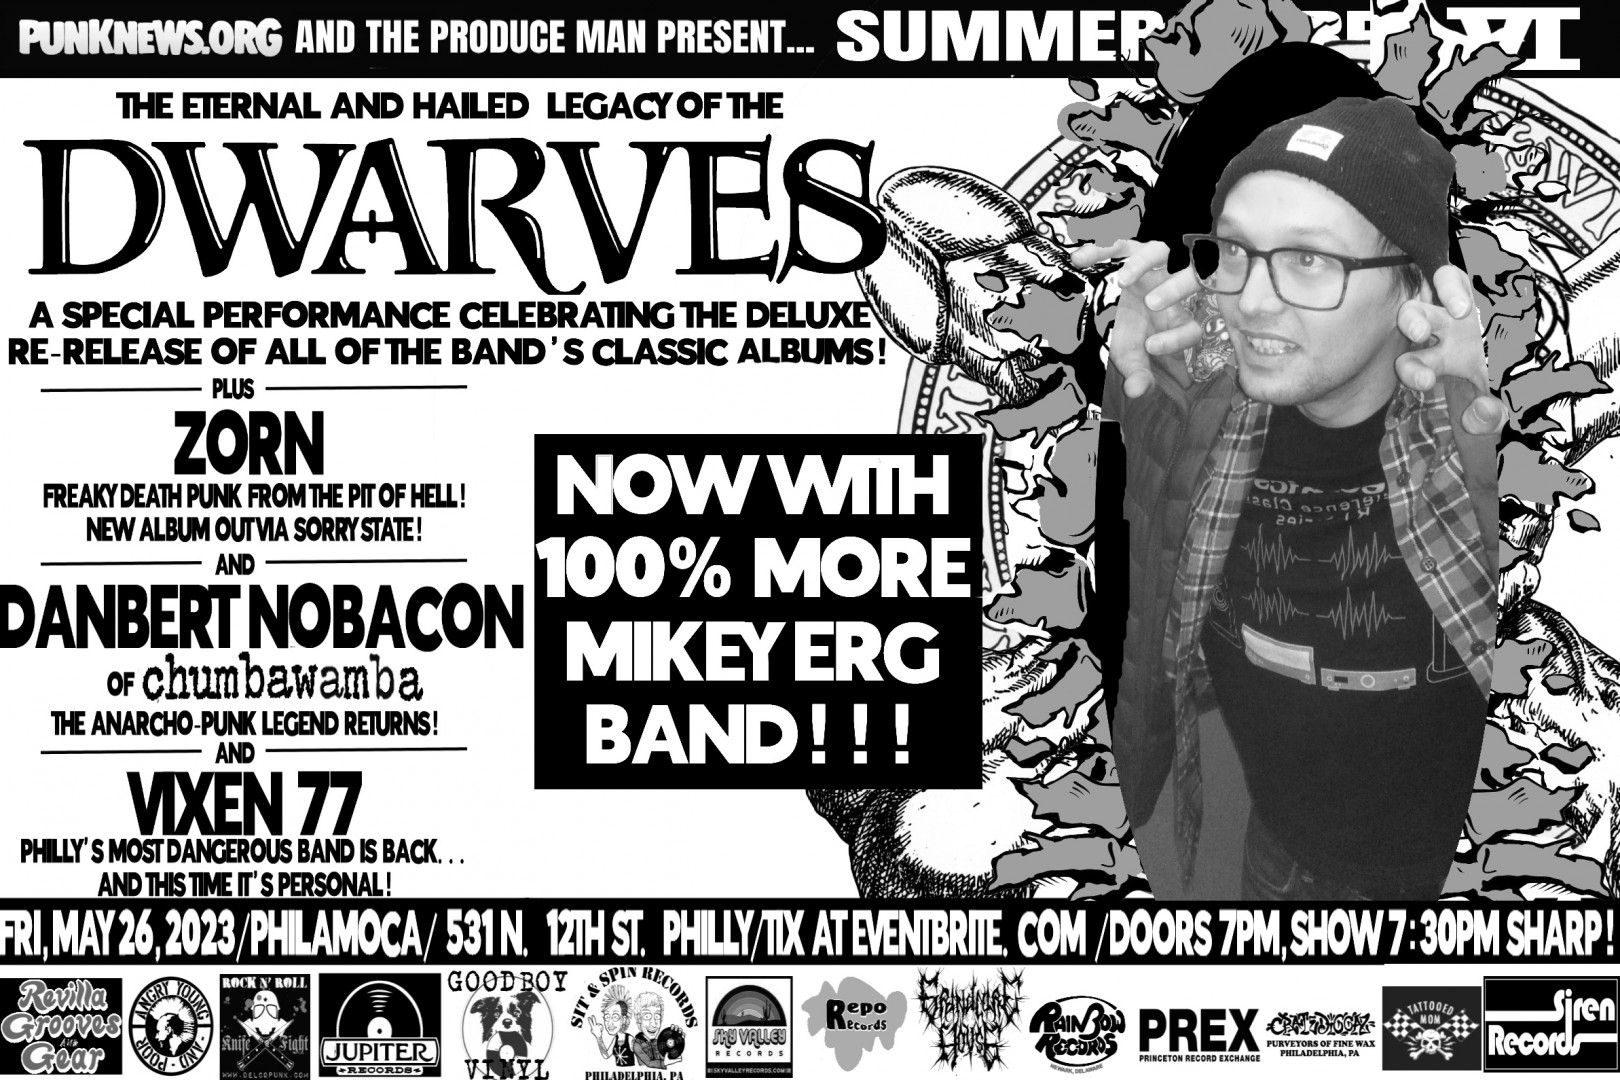 Surprise!!! The Mikey Erg Band is playing Summer Soiree 6 with the Dwarves in Philly!!!